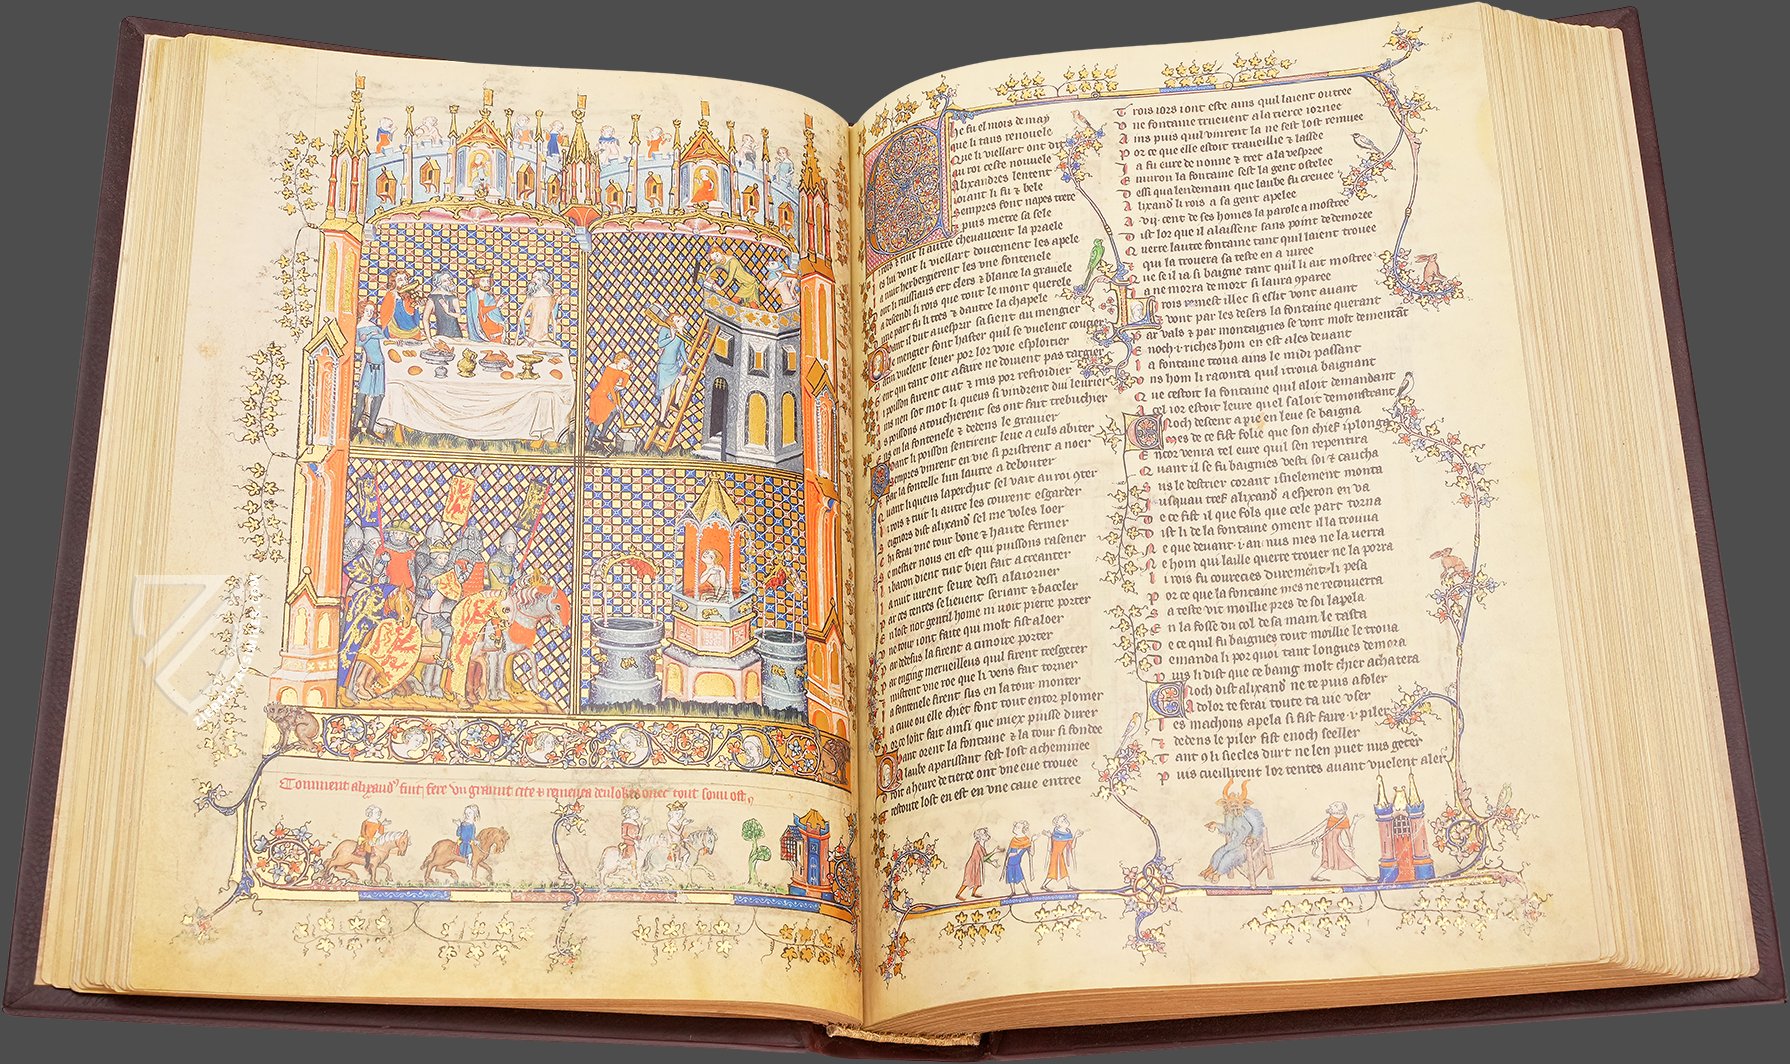 Marco Polo: Miniature from the Book The Travels of Marco Polo